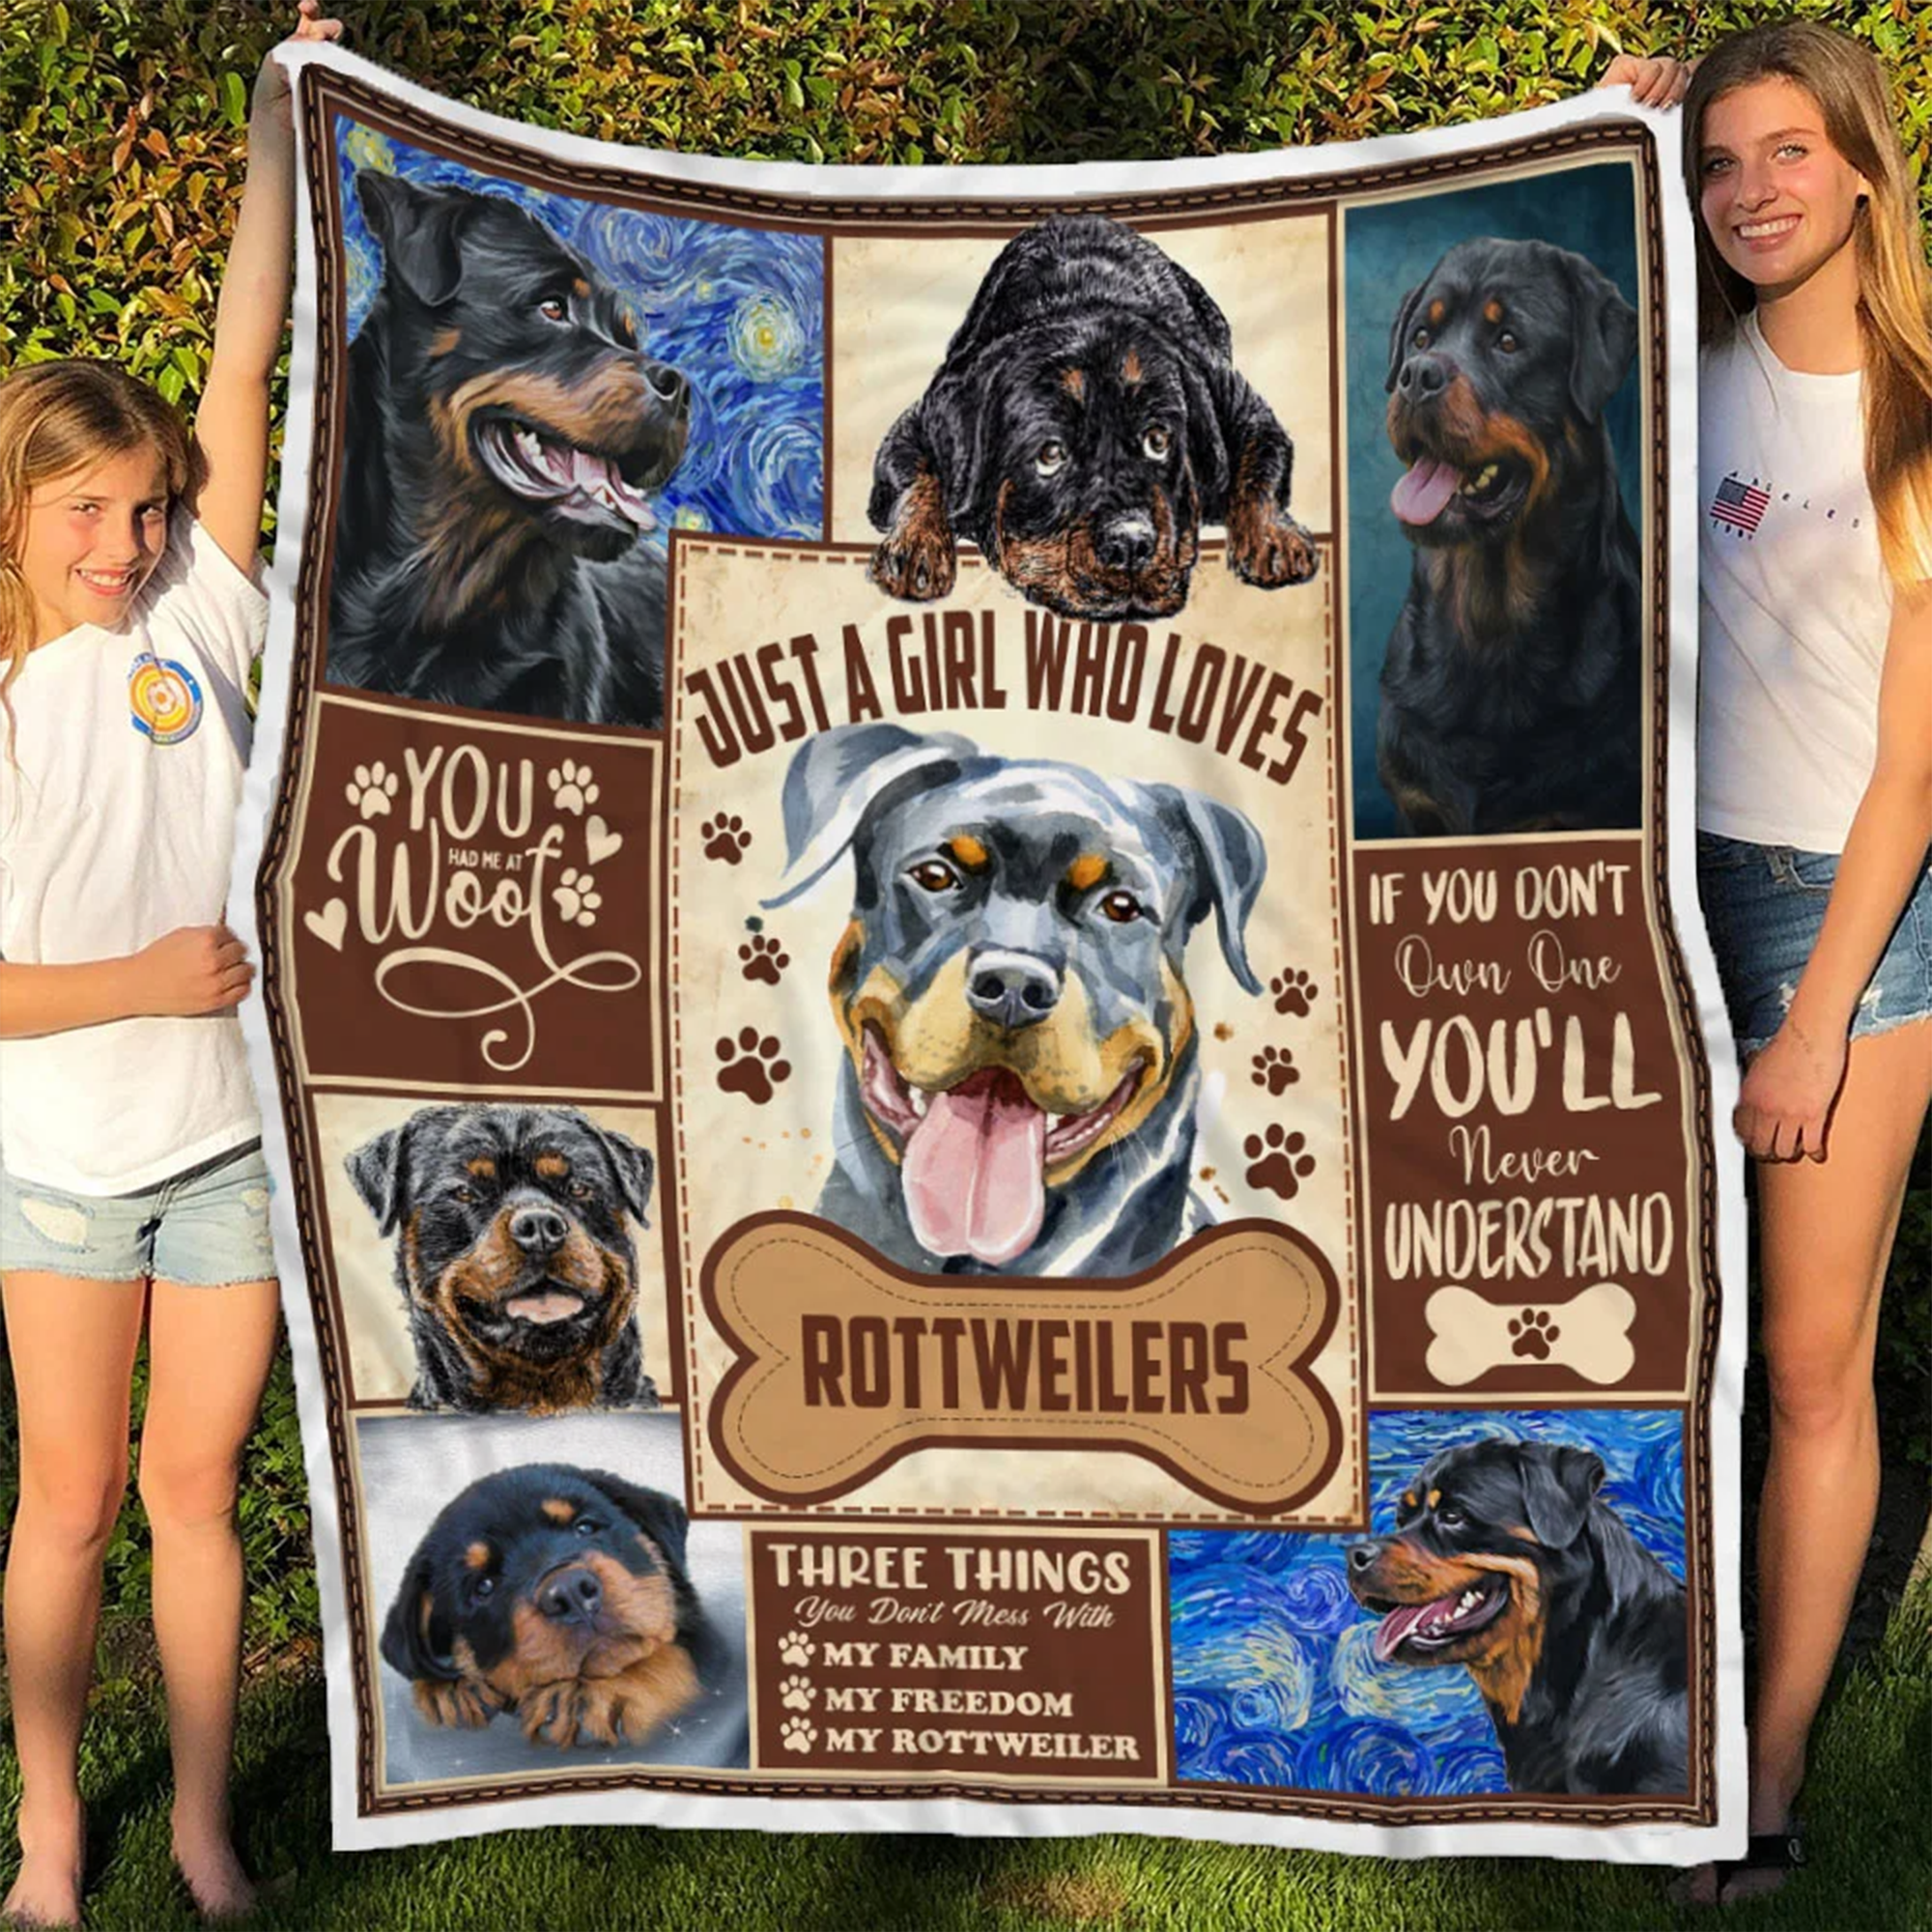 Rottweilers Blanket – Just A Girl Who Loves Rottweilers